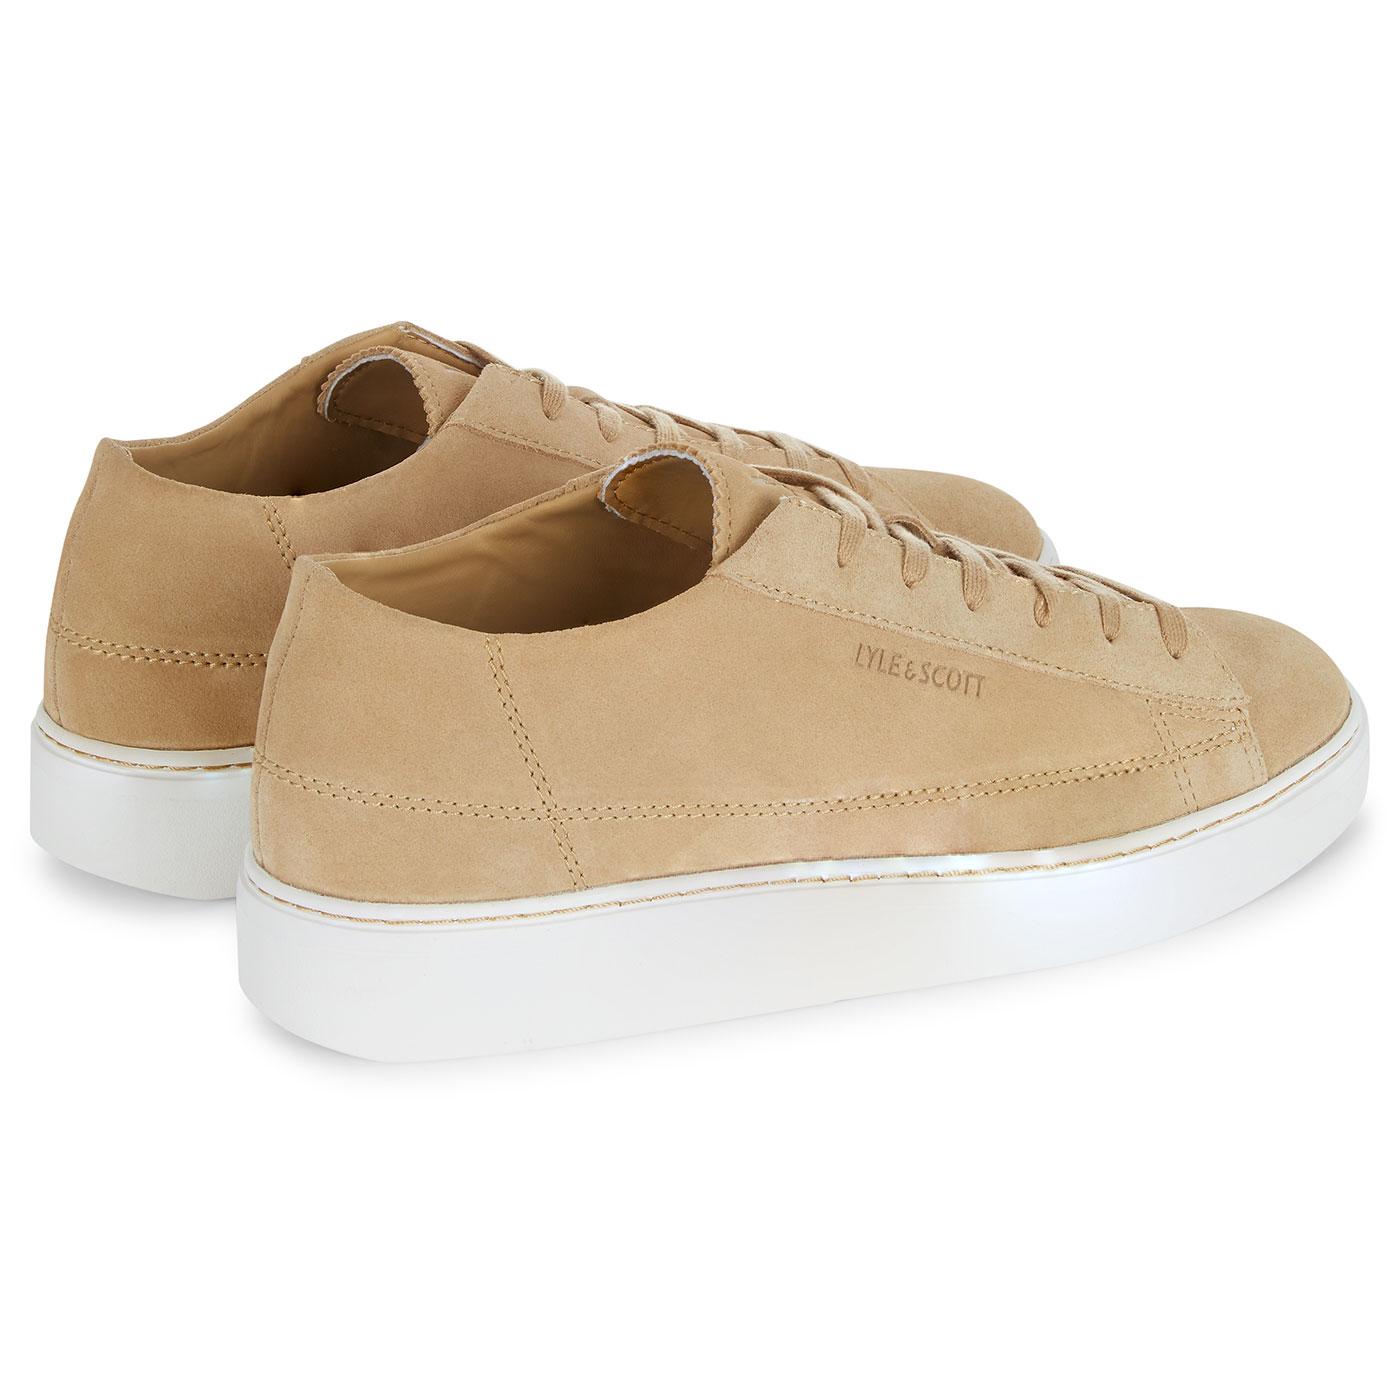 LYLE & SCOTT Shankly Retro 1970s Suede Trainers in Tan